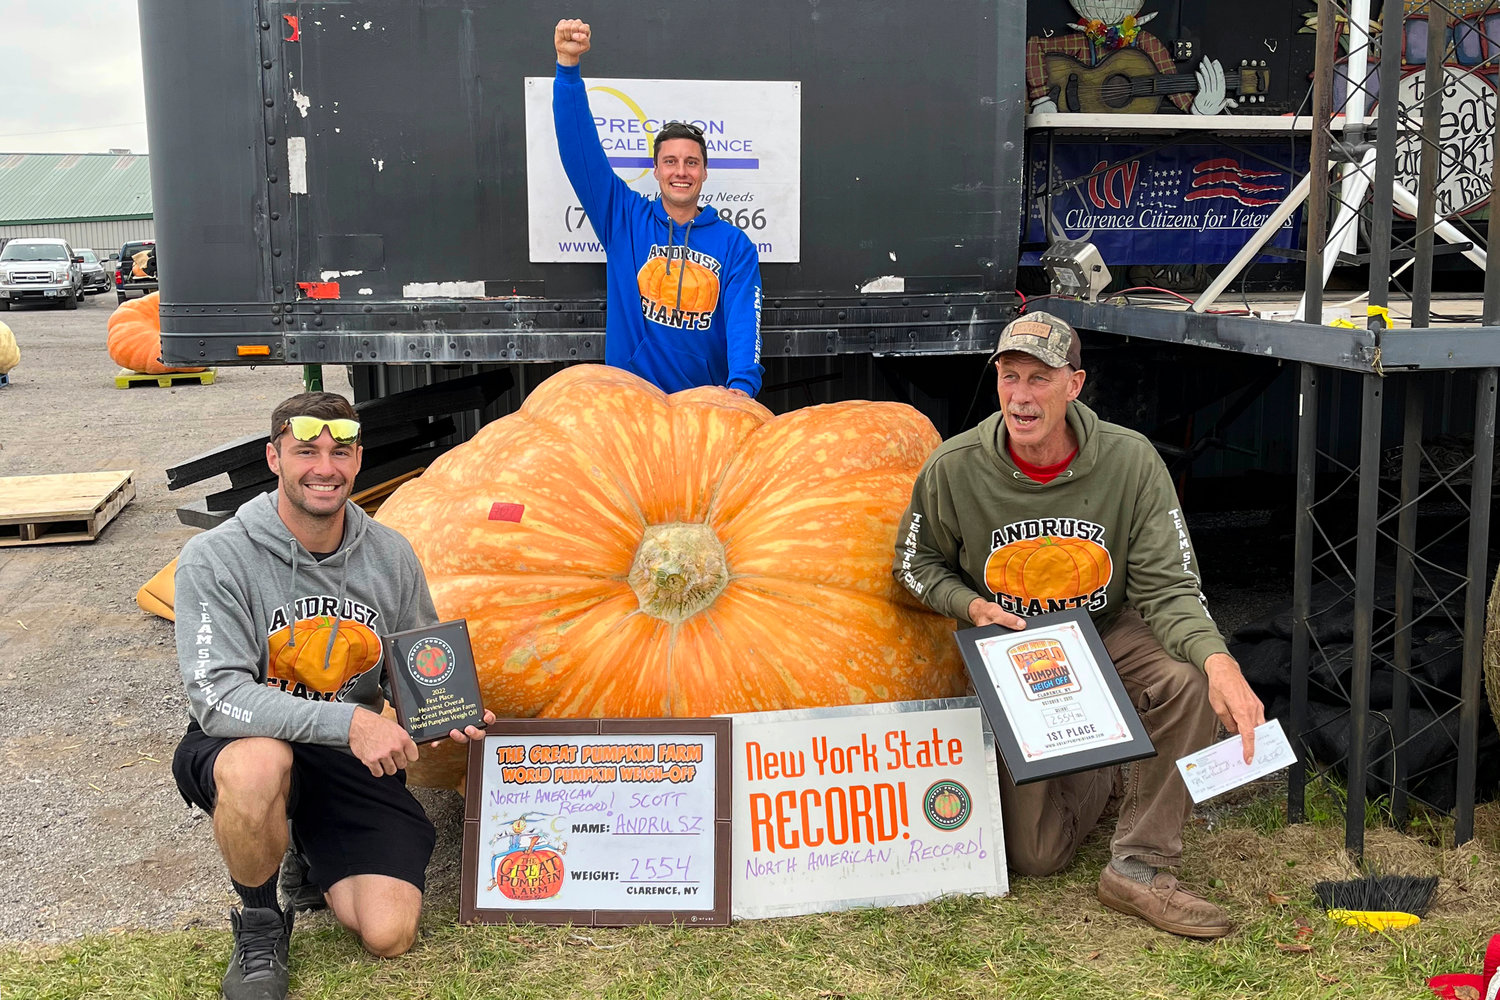 In this photo provided by The Great Pumpkin Farm, Emmett Andrusz, from left, Steve Andrusz and Scott Andrusz, pose with the record setting 2,554-pound pumpkin, in Clarence, N.Y., Saturday, Oct. 1, 2022. Scott Andrusz's entry broke the previous record of 2,528 pounds.